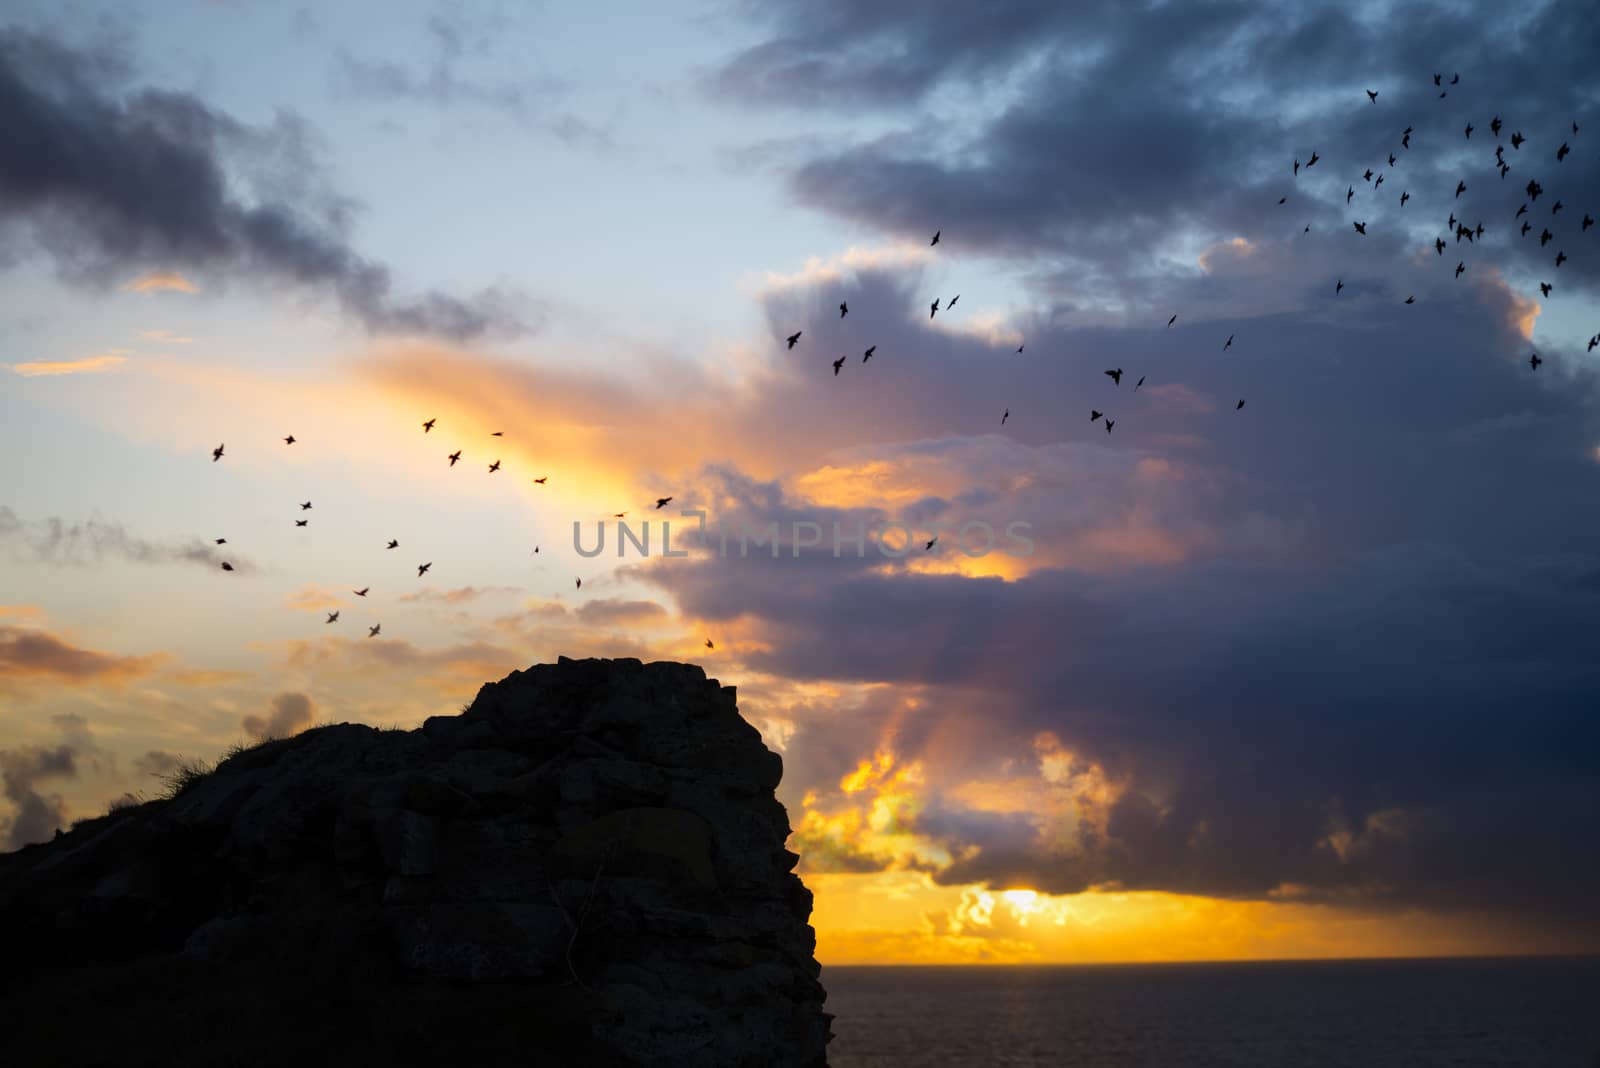 flocks of starlings flying into a bright orange sunset sky above ruins